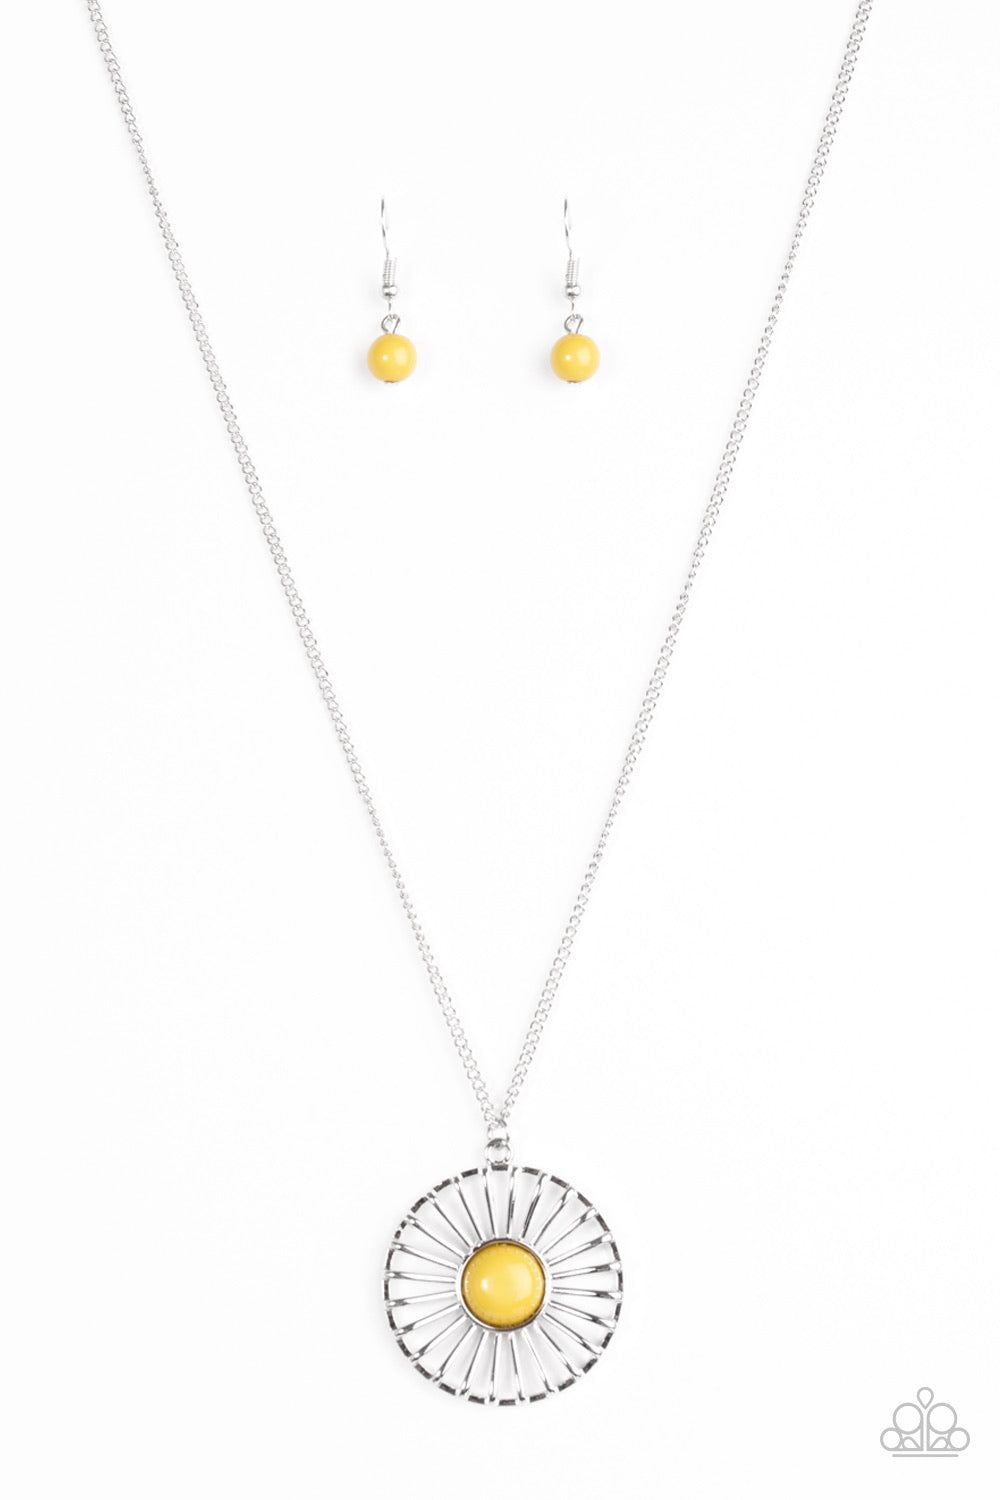 Paparazzi Accessories - She WHEEL be loved #N413 Peg - Yellow Necklace